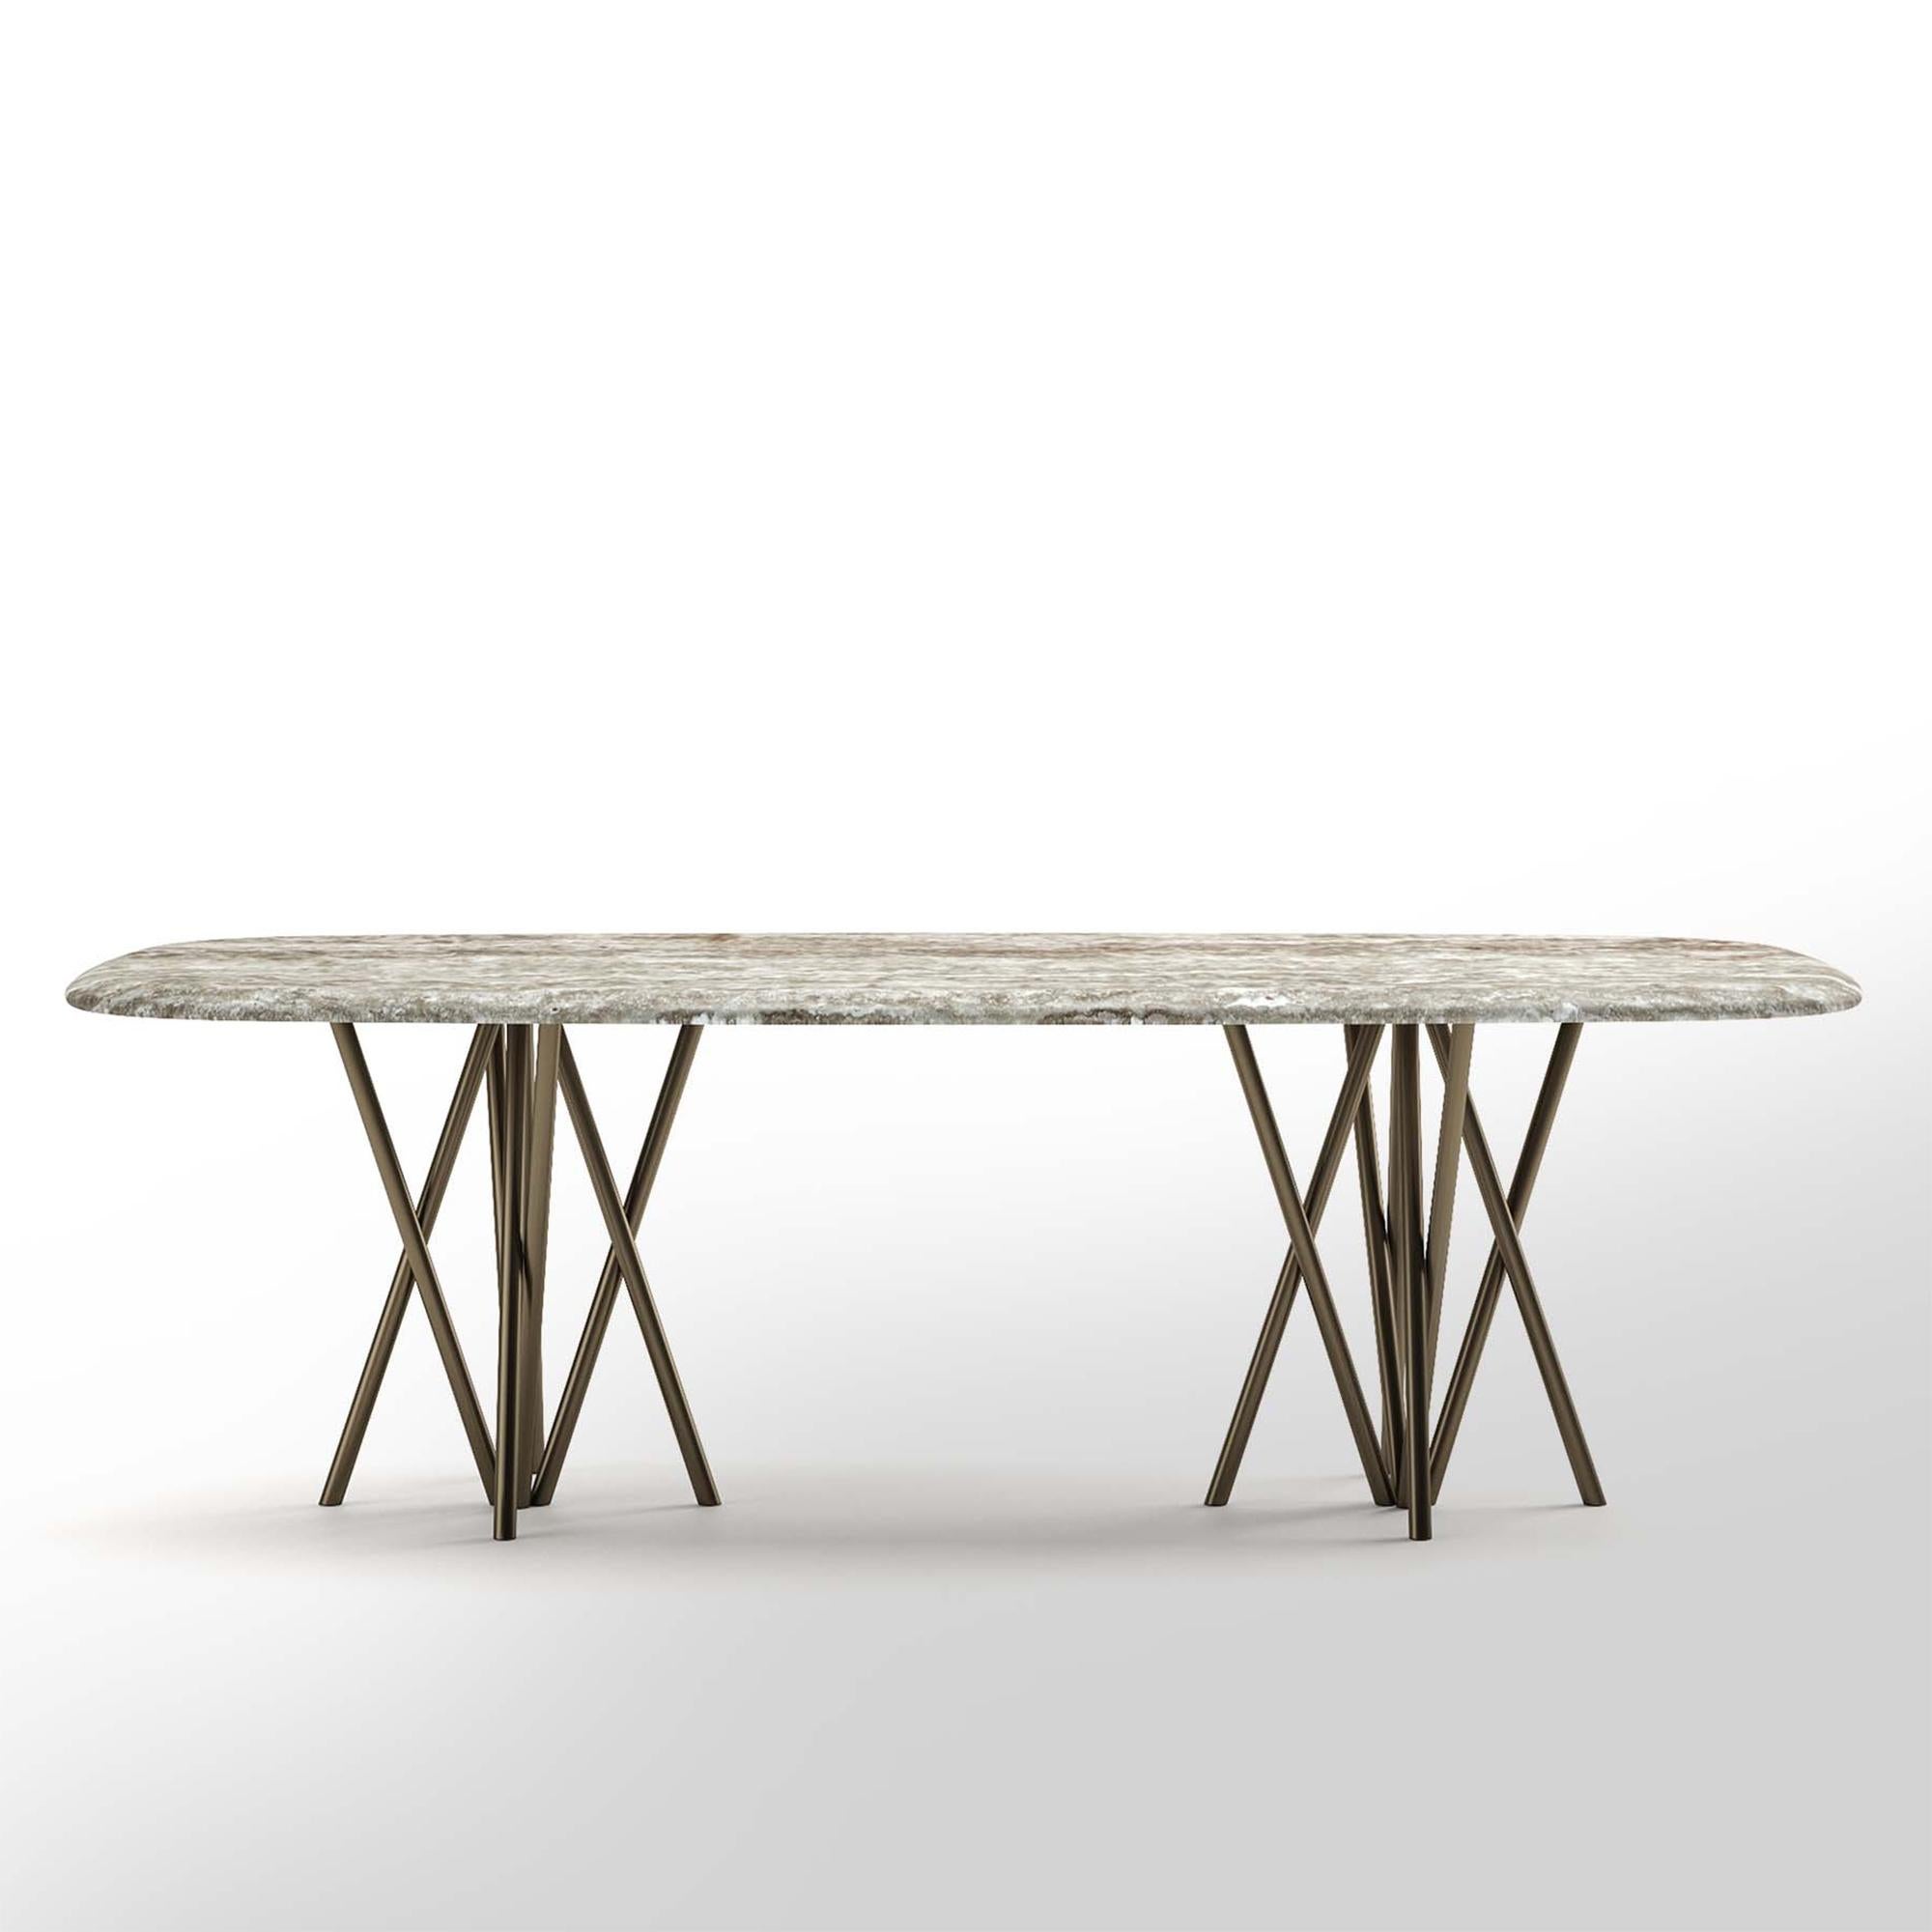 Dining table Arena outdoor with 2 bases in stainless steel 
in bronze finish and with silver travertine polished table top.